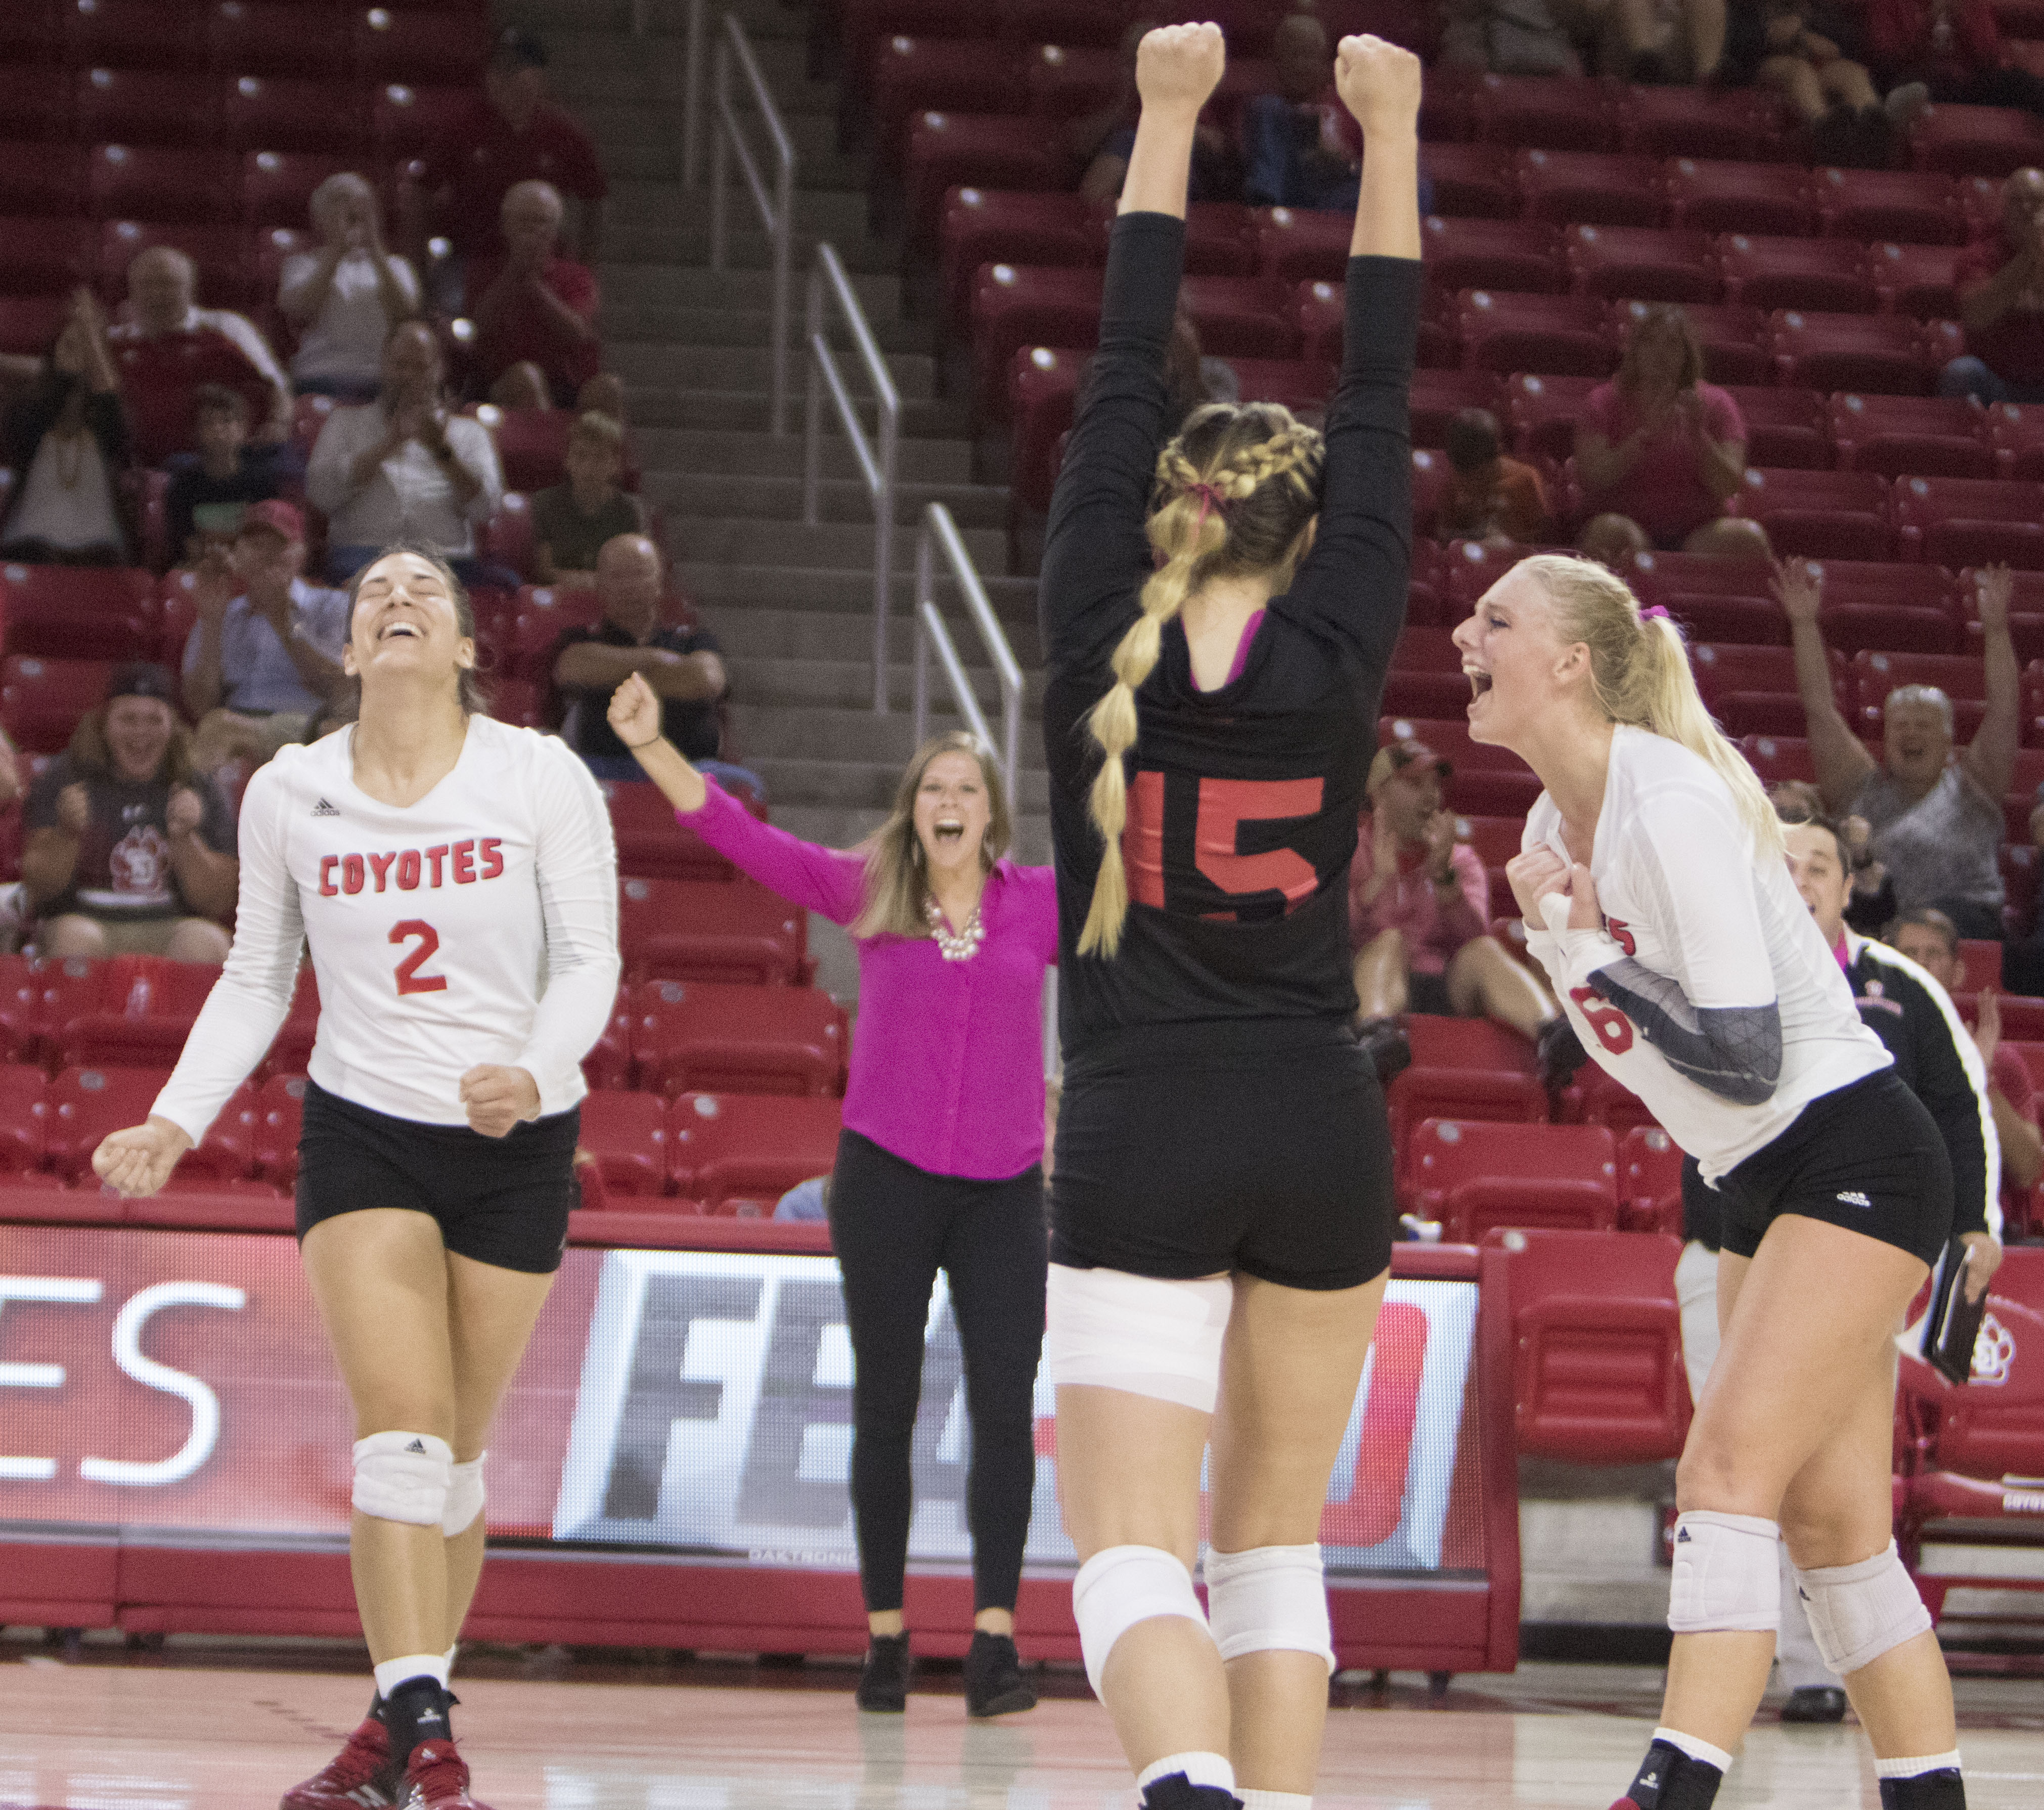 Photo gallery: Volleyball team defeats Western Illinois at home-opener